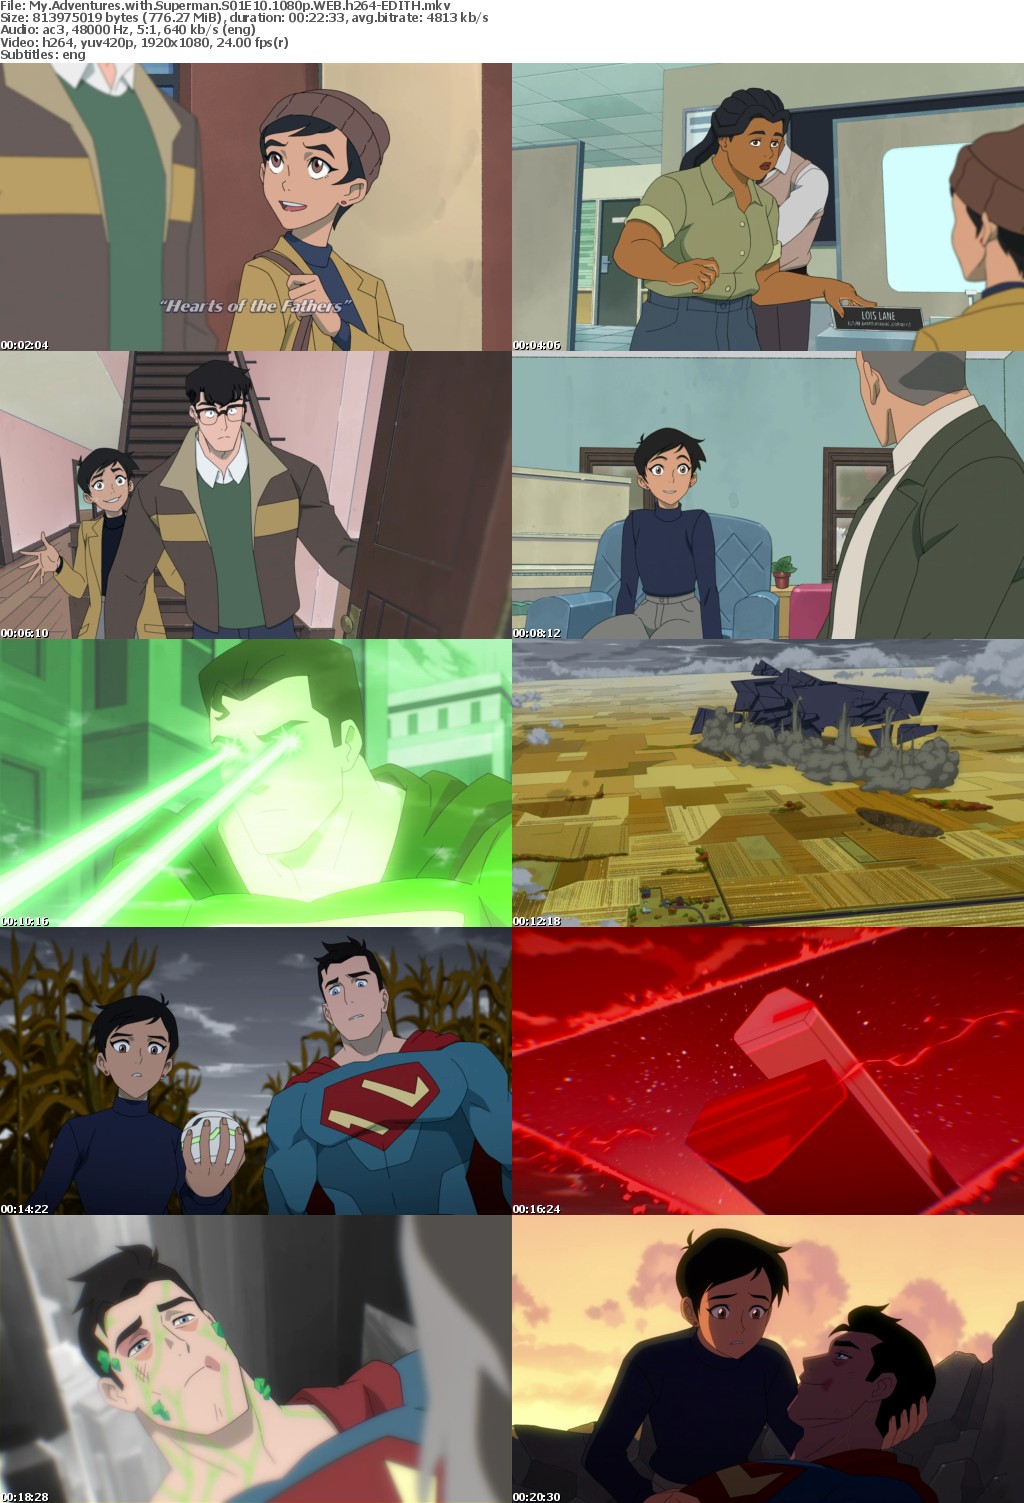 My Adventures with Superman S01E10 1080p WEB h264-EDITH